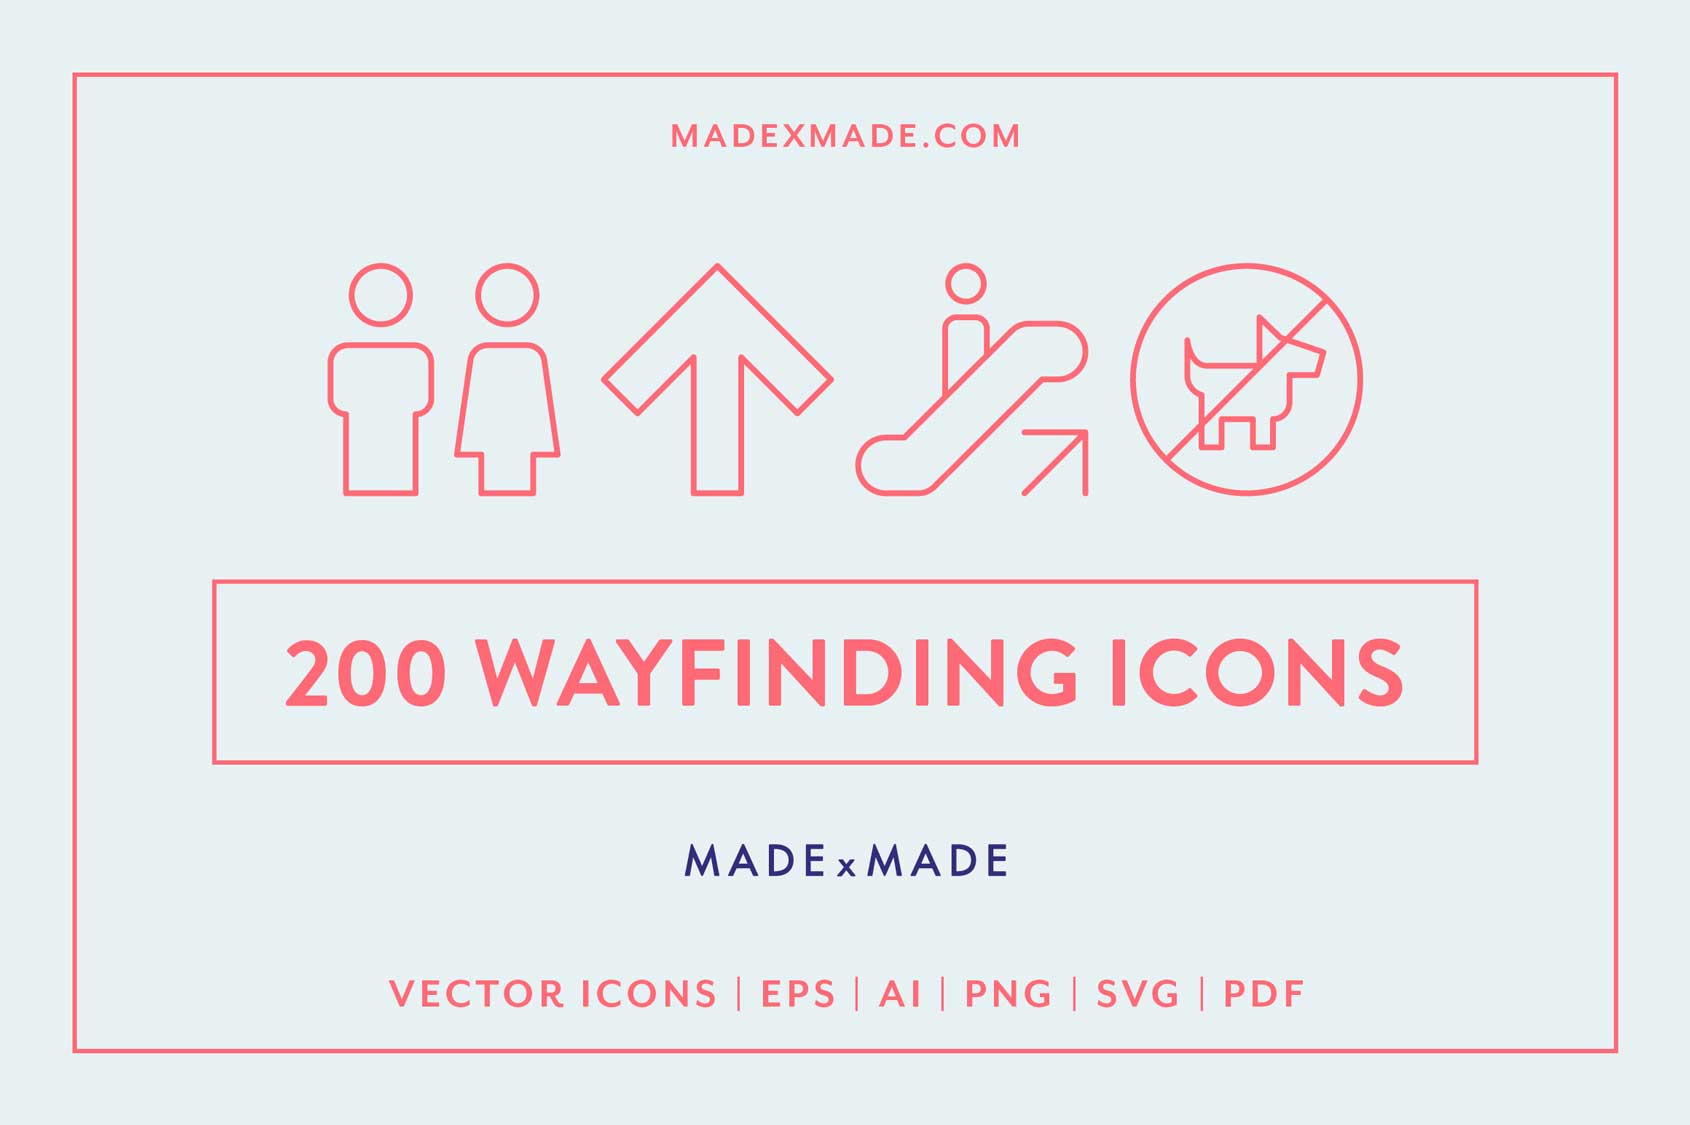 made x made icons wayfinding cover – icons for signage, transport, navigation, accessibility, people, public spaces, amenities